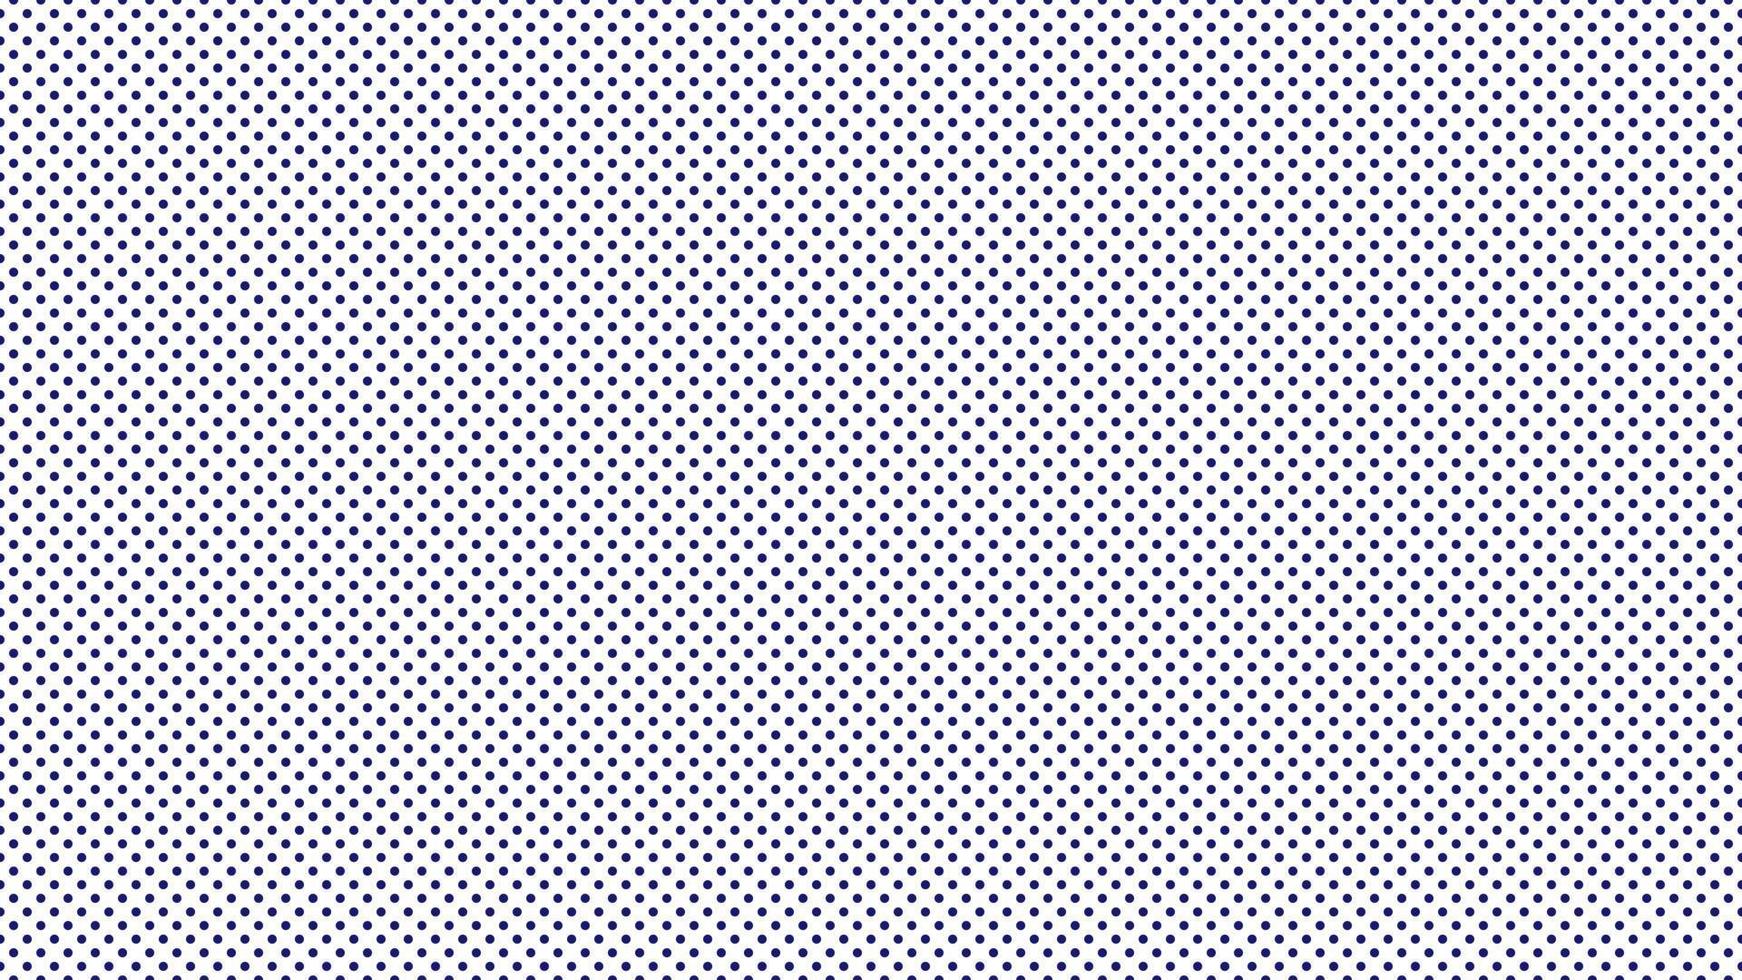 midnight blue color polka dots background vector